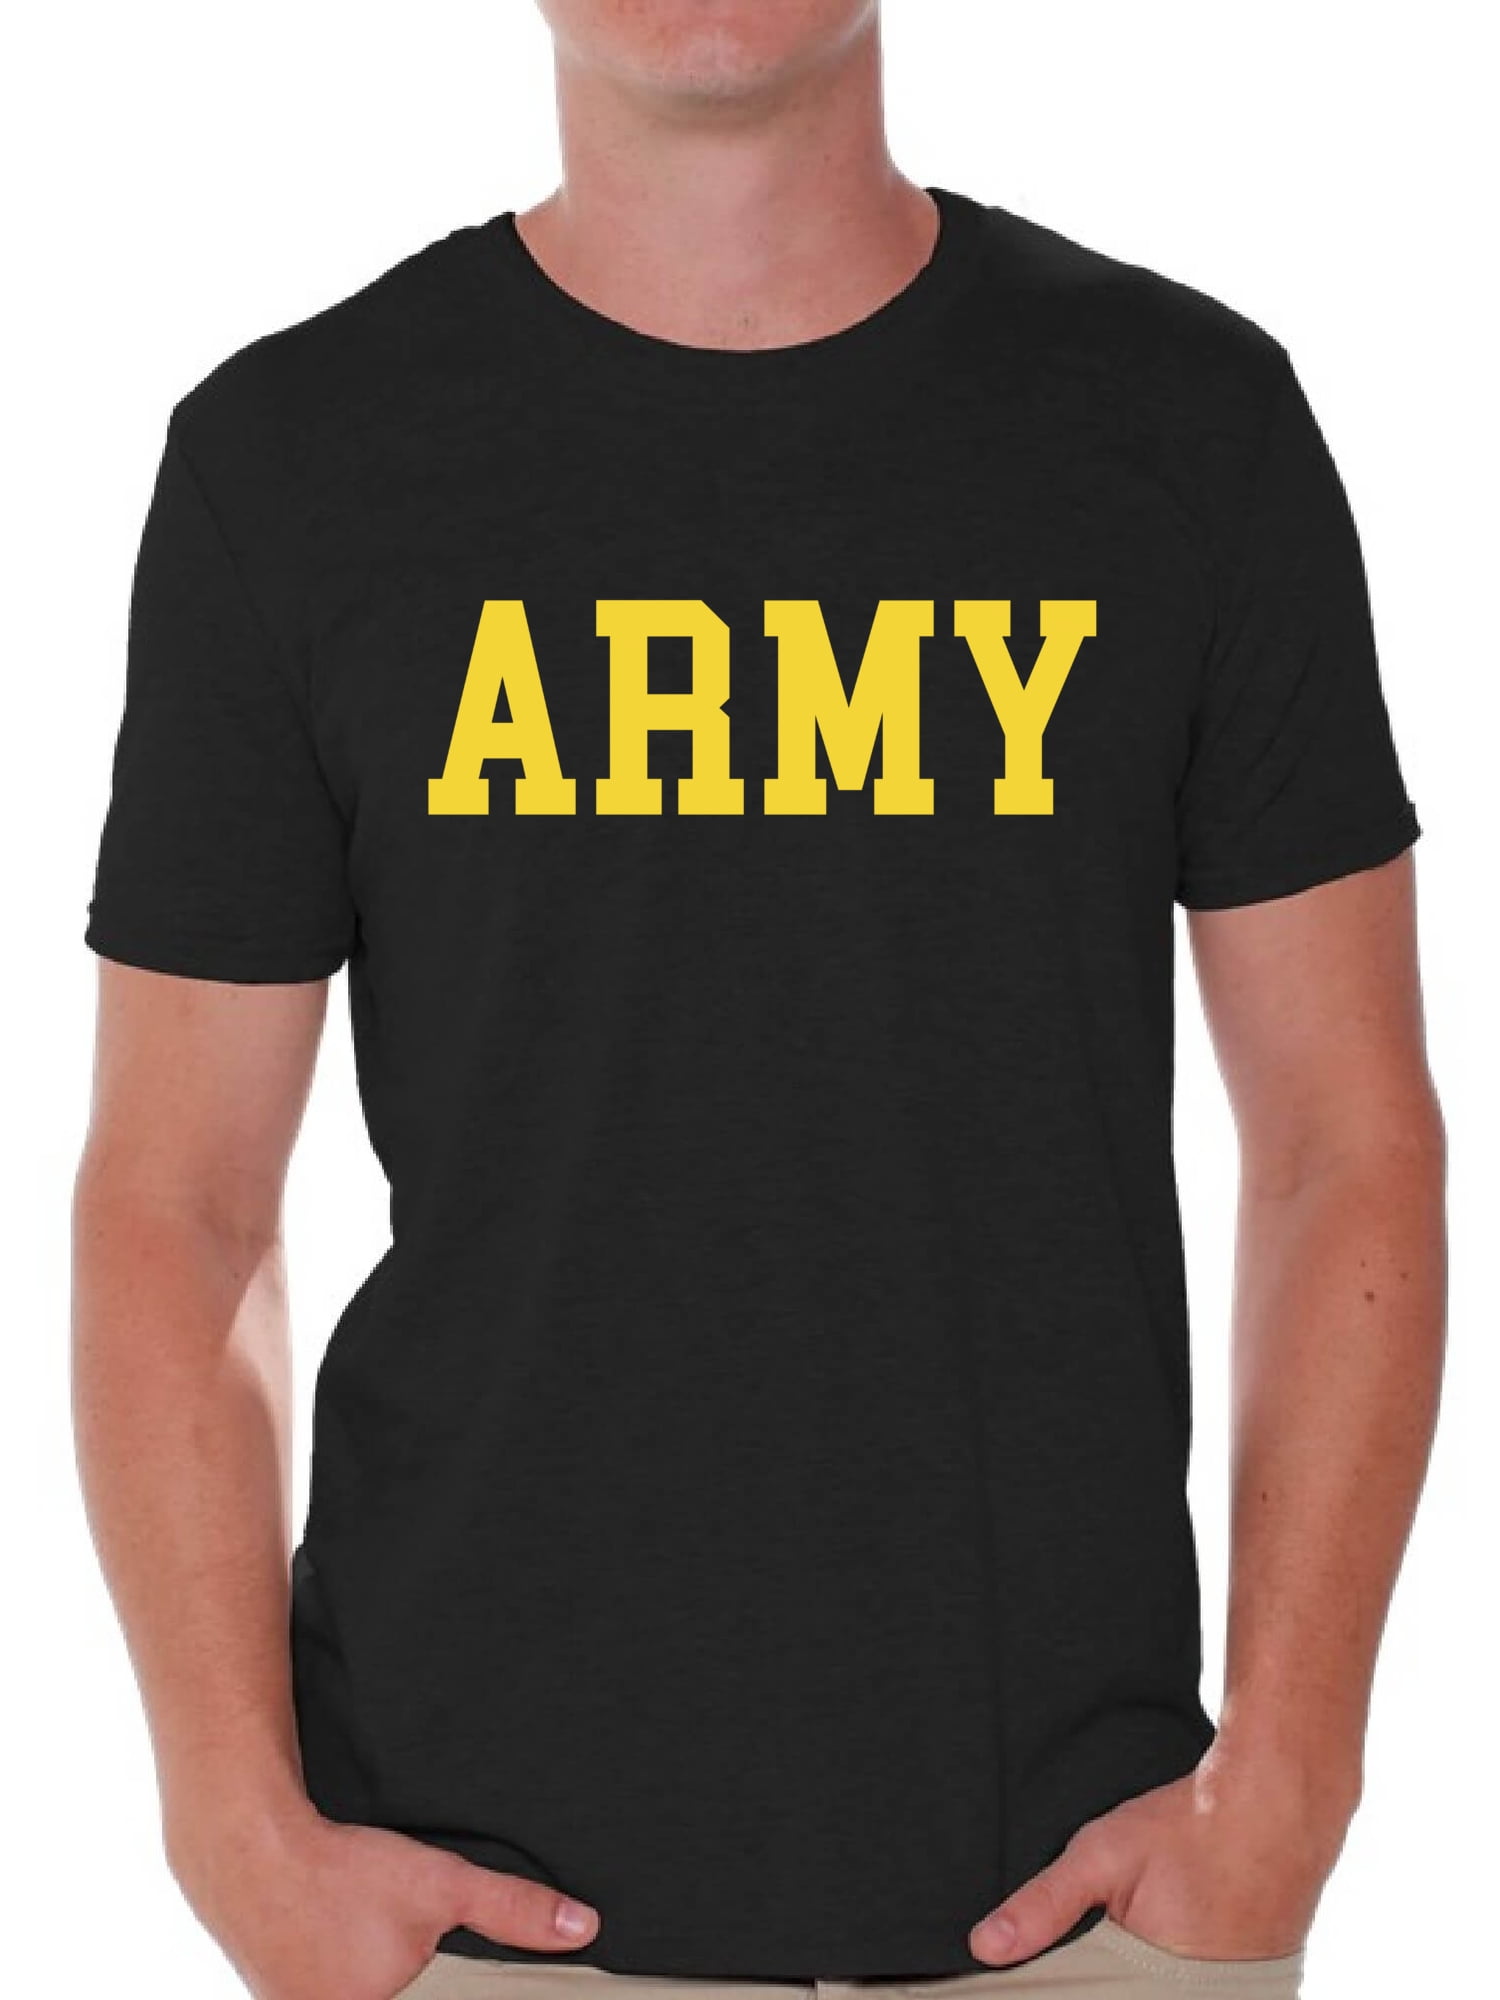 Awkward Styles - Awkward Styles Army Shirt for Men Military Gifts for ...